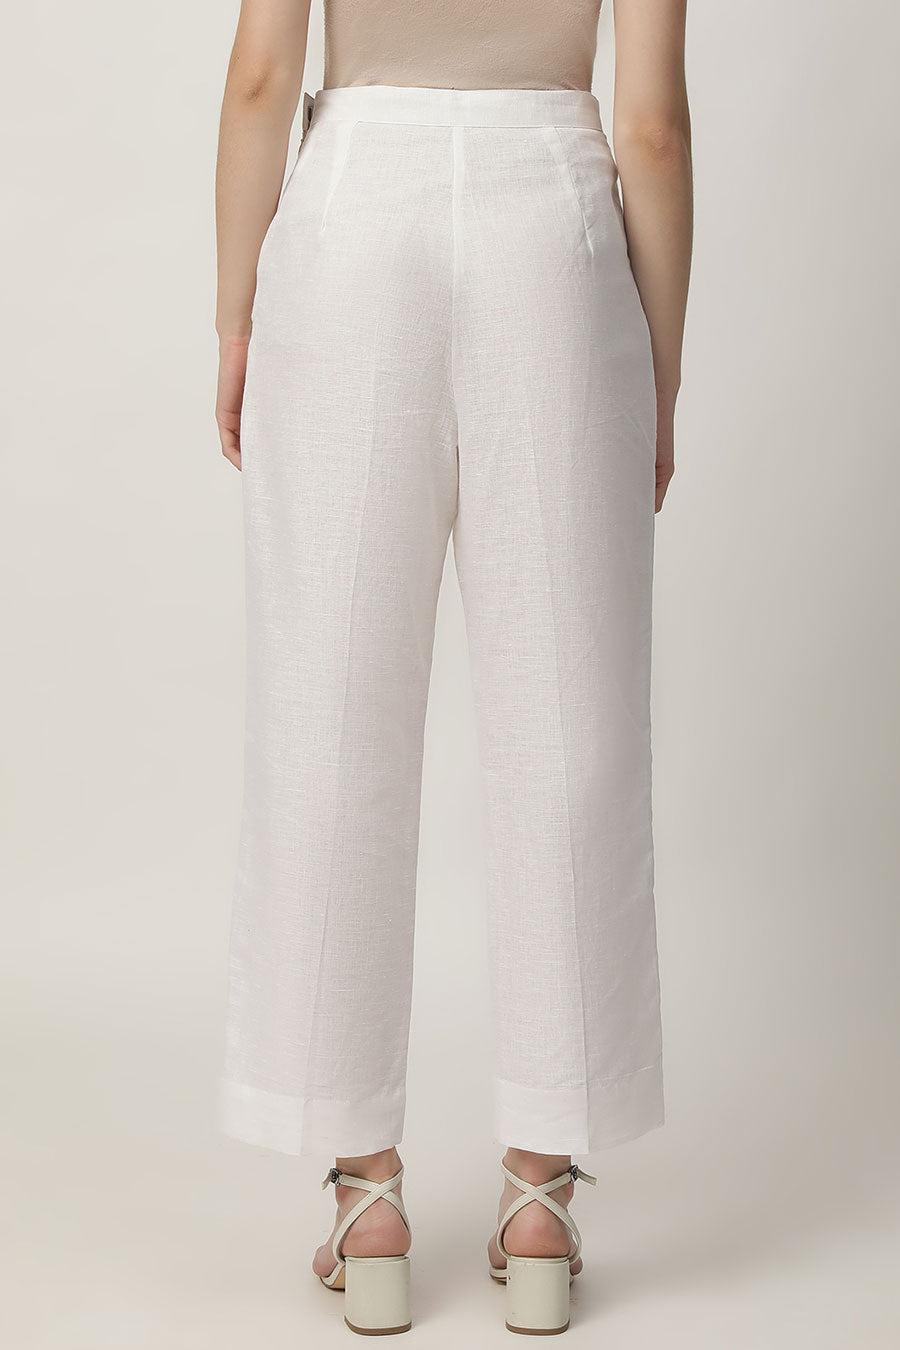 Fifi Straight Fit Pants